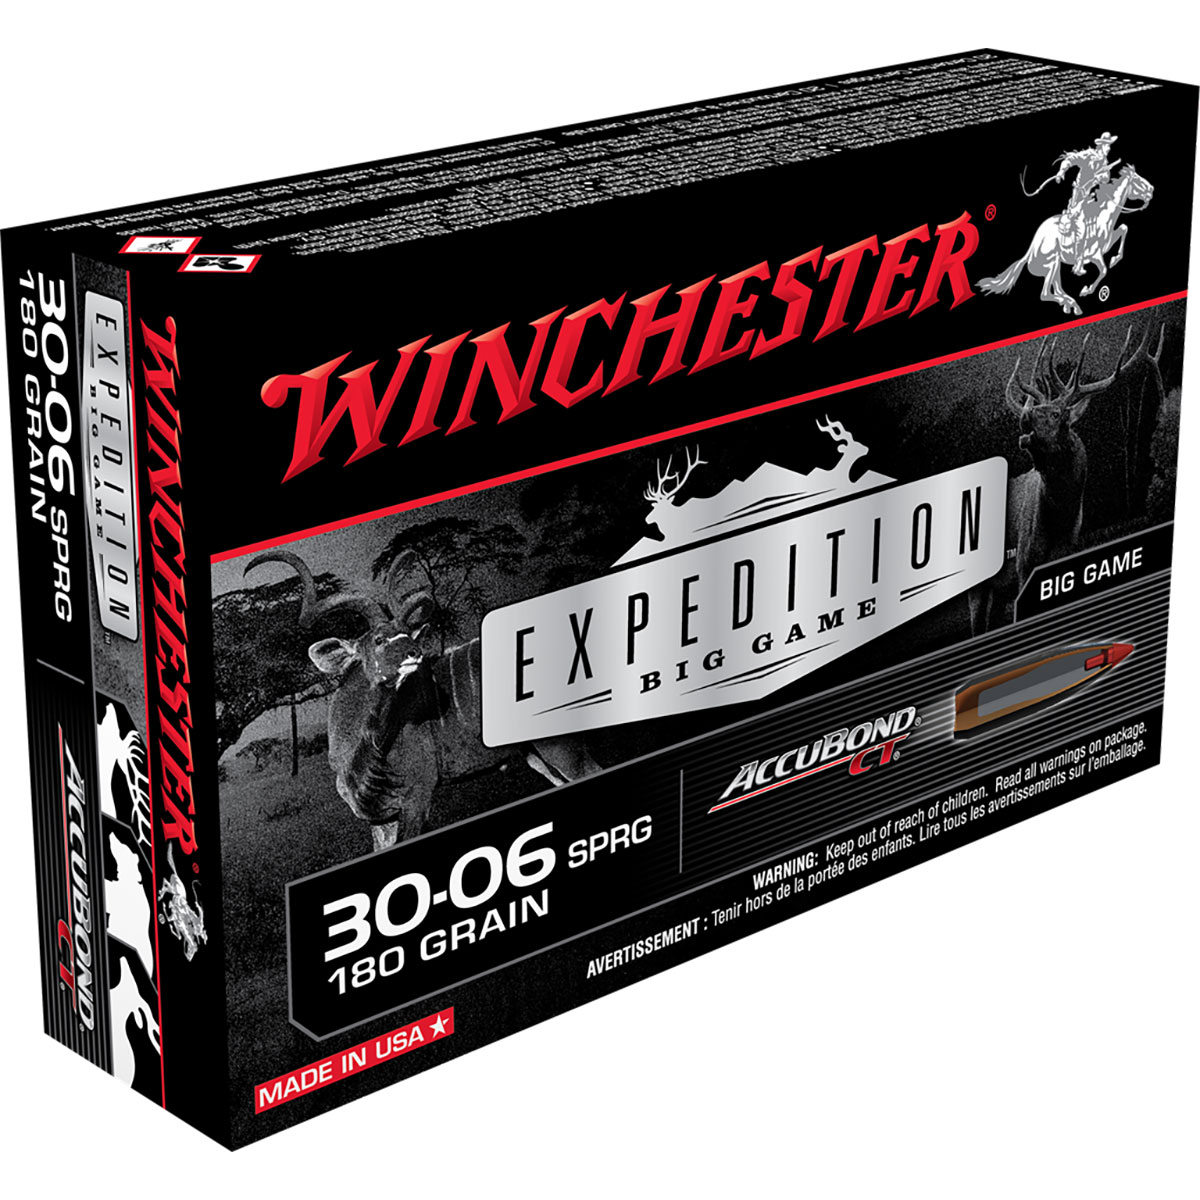 WINCHESTER - EXPEDITION BIG GAME 30-06 SPRINGFIELD RIFLE AMMO